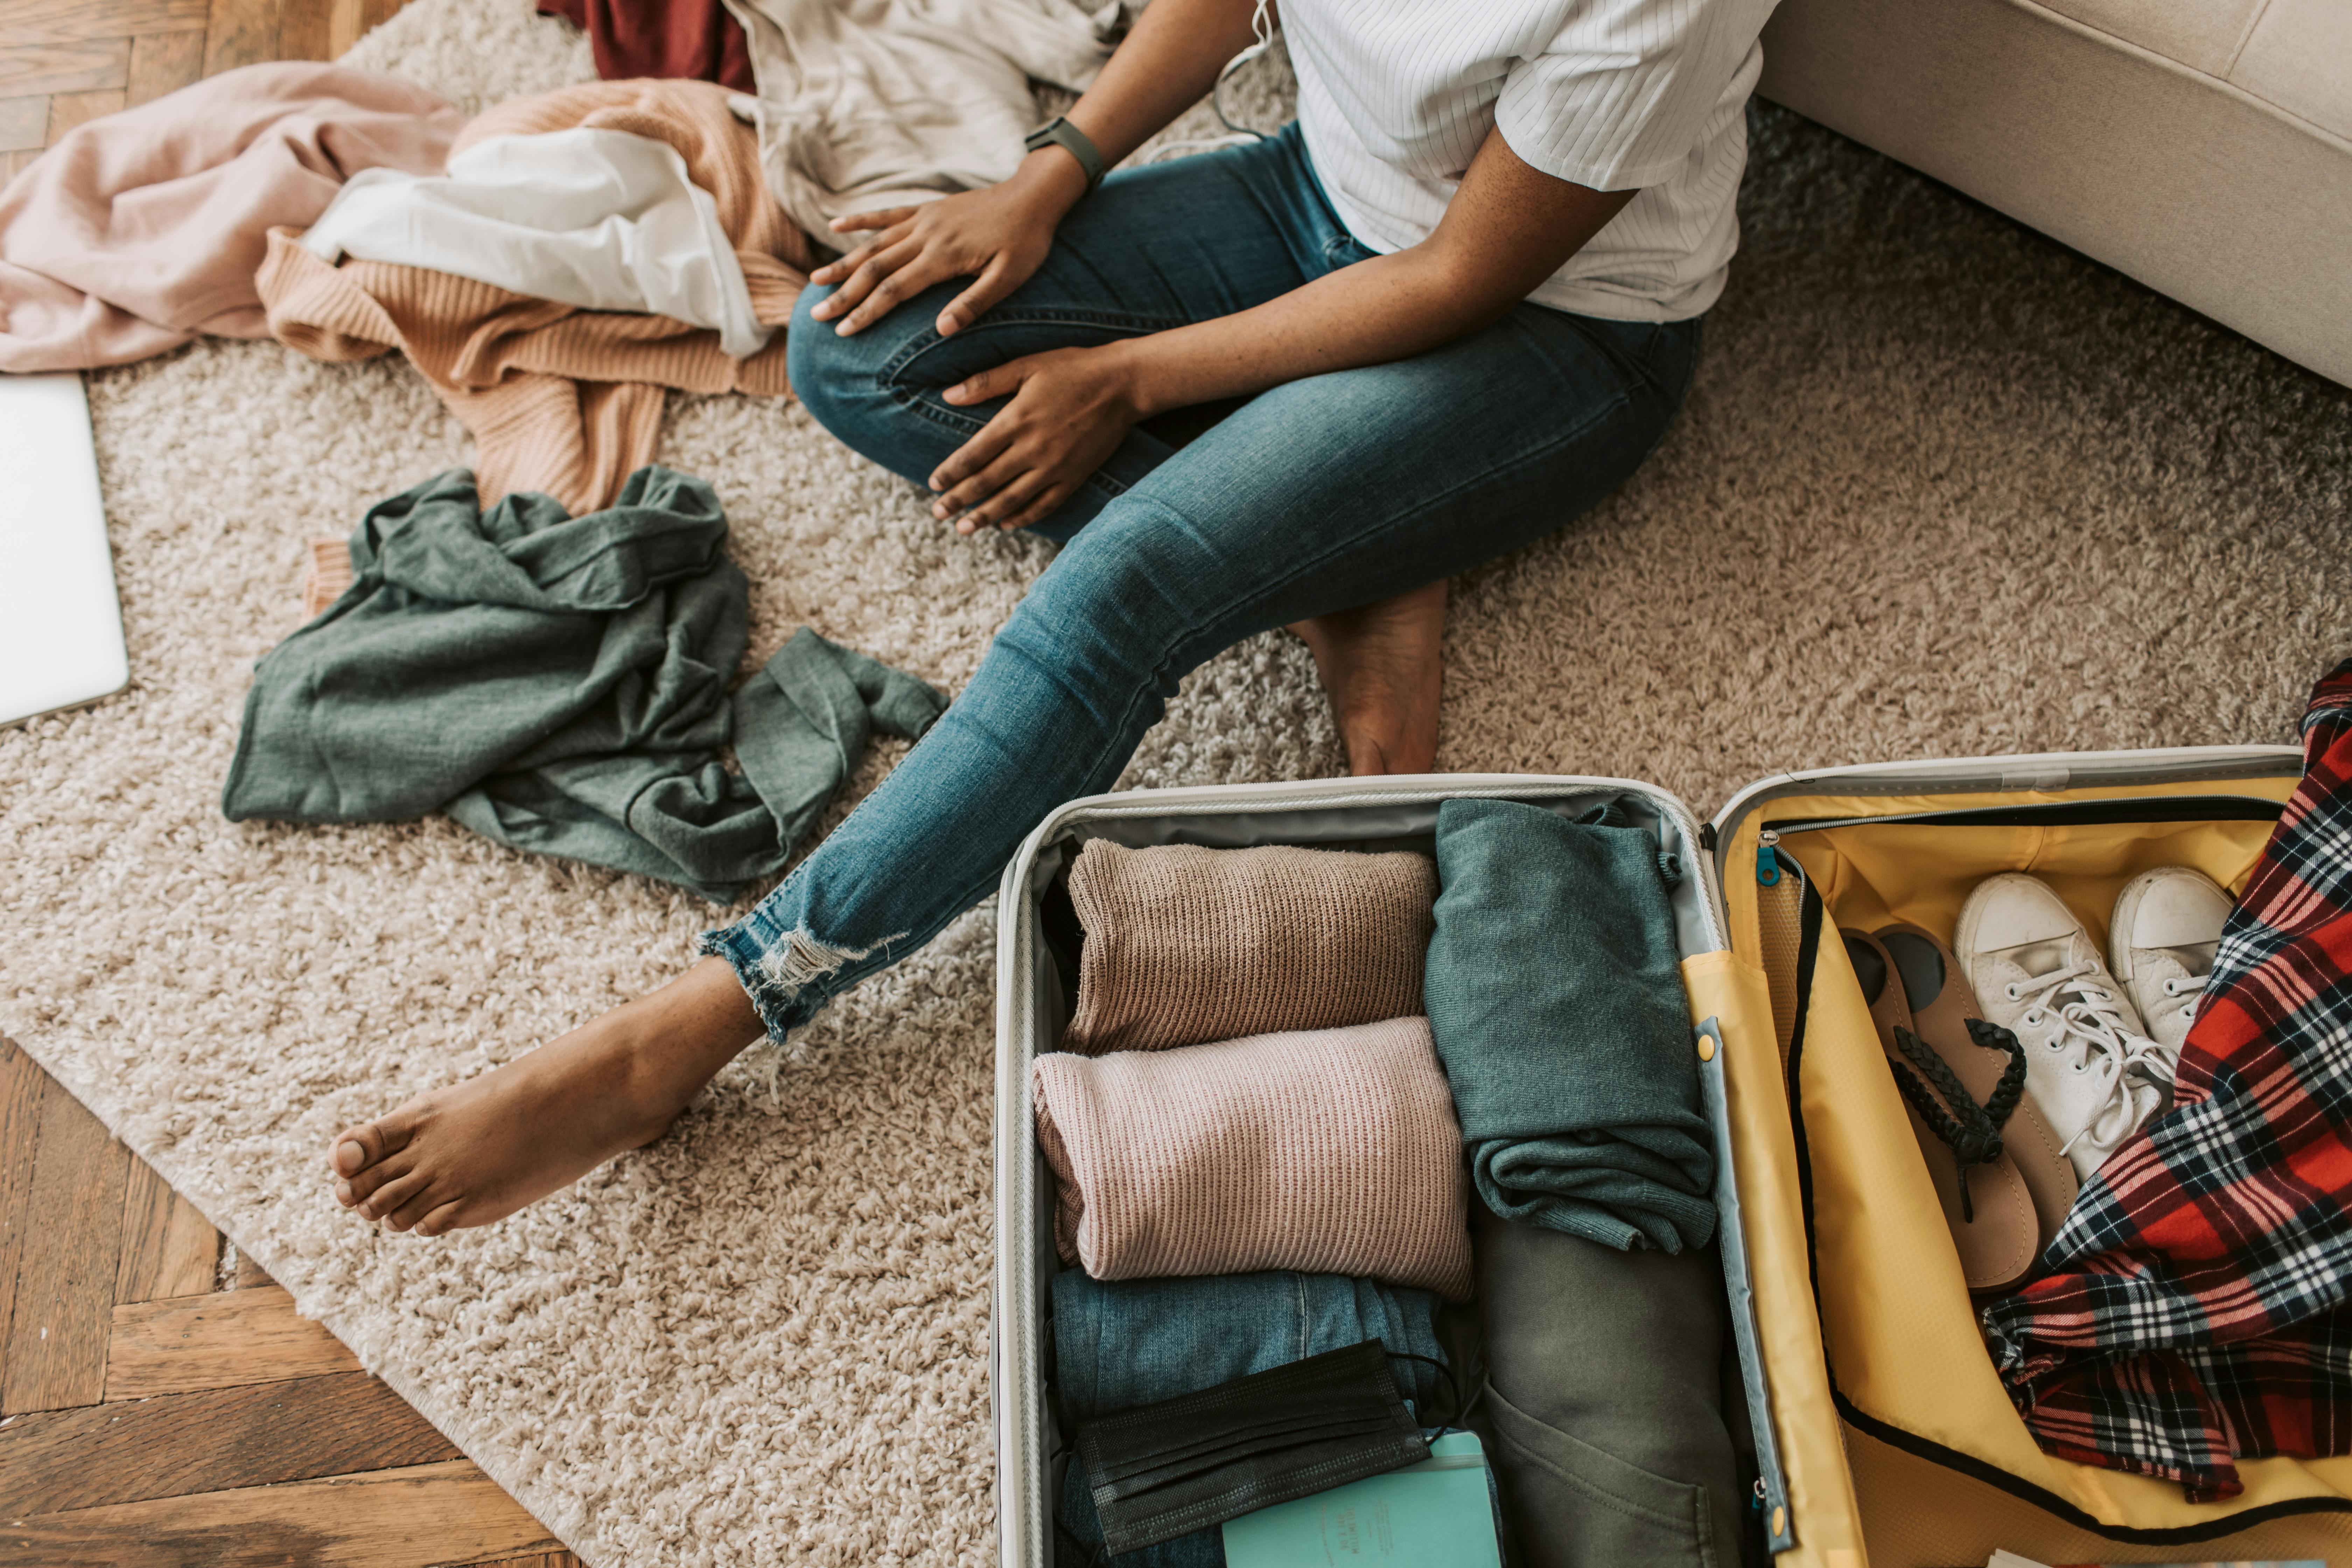 A woman arranging her clothes and suitcase | Source: Pexels